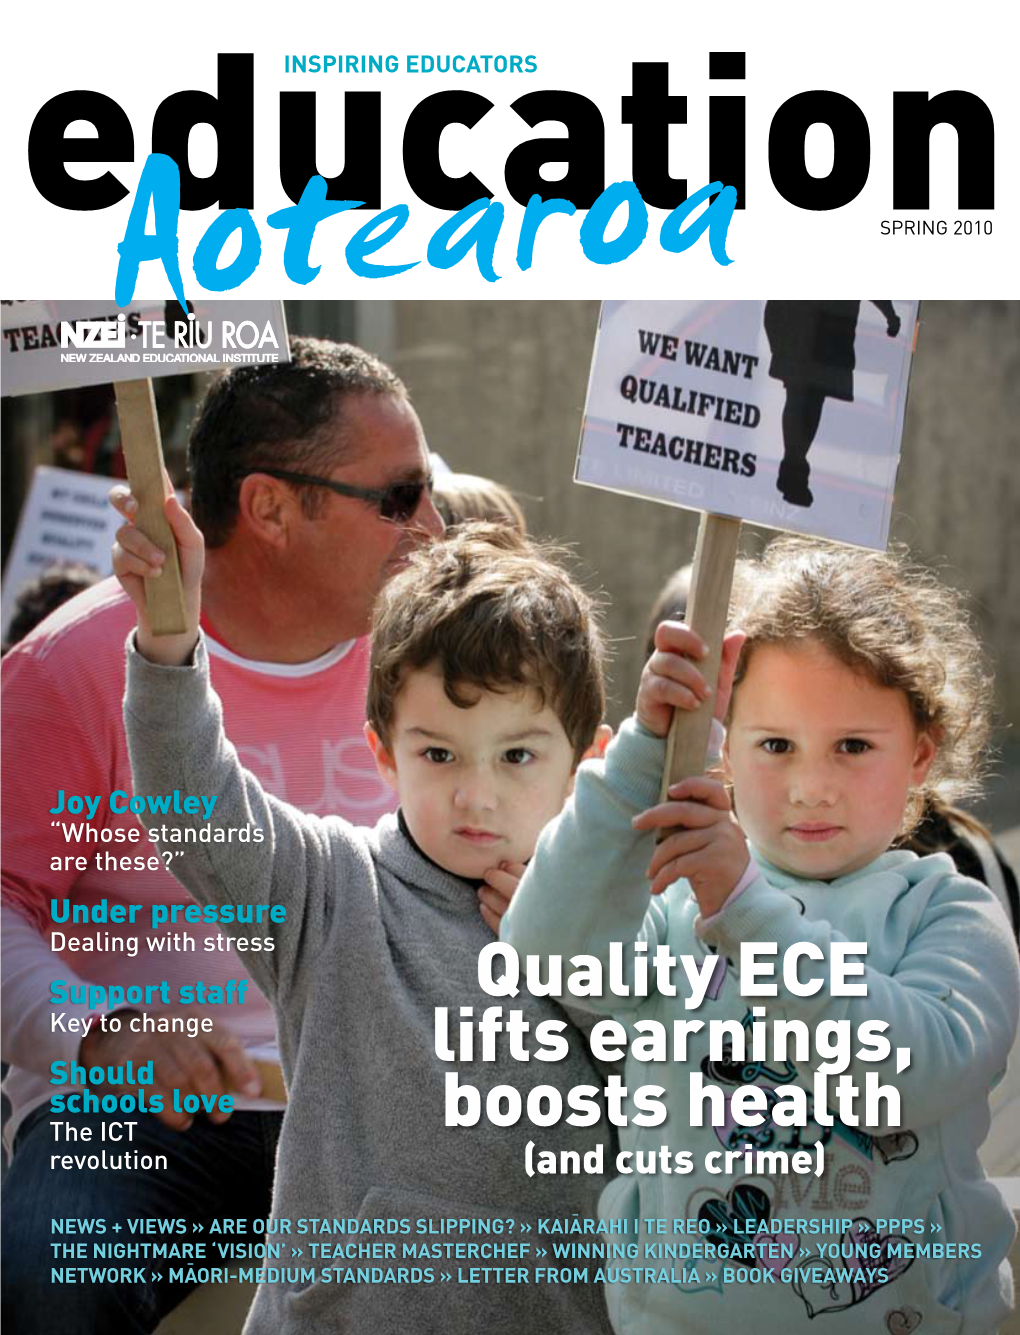 Quality Ece Lifts Earnings, Boosts Health